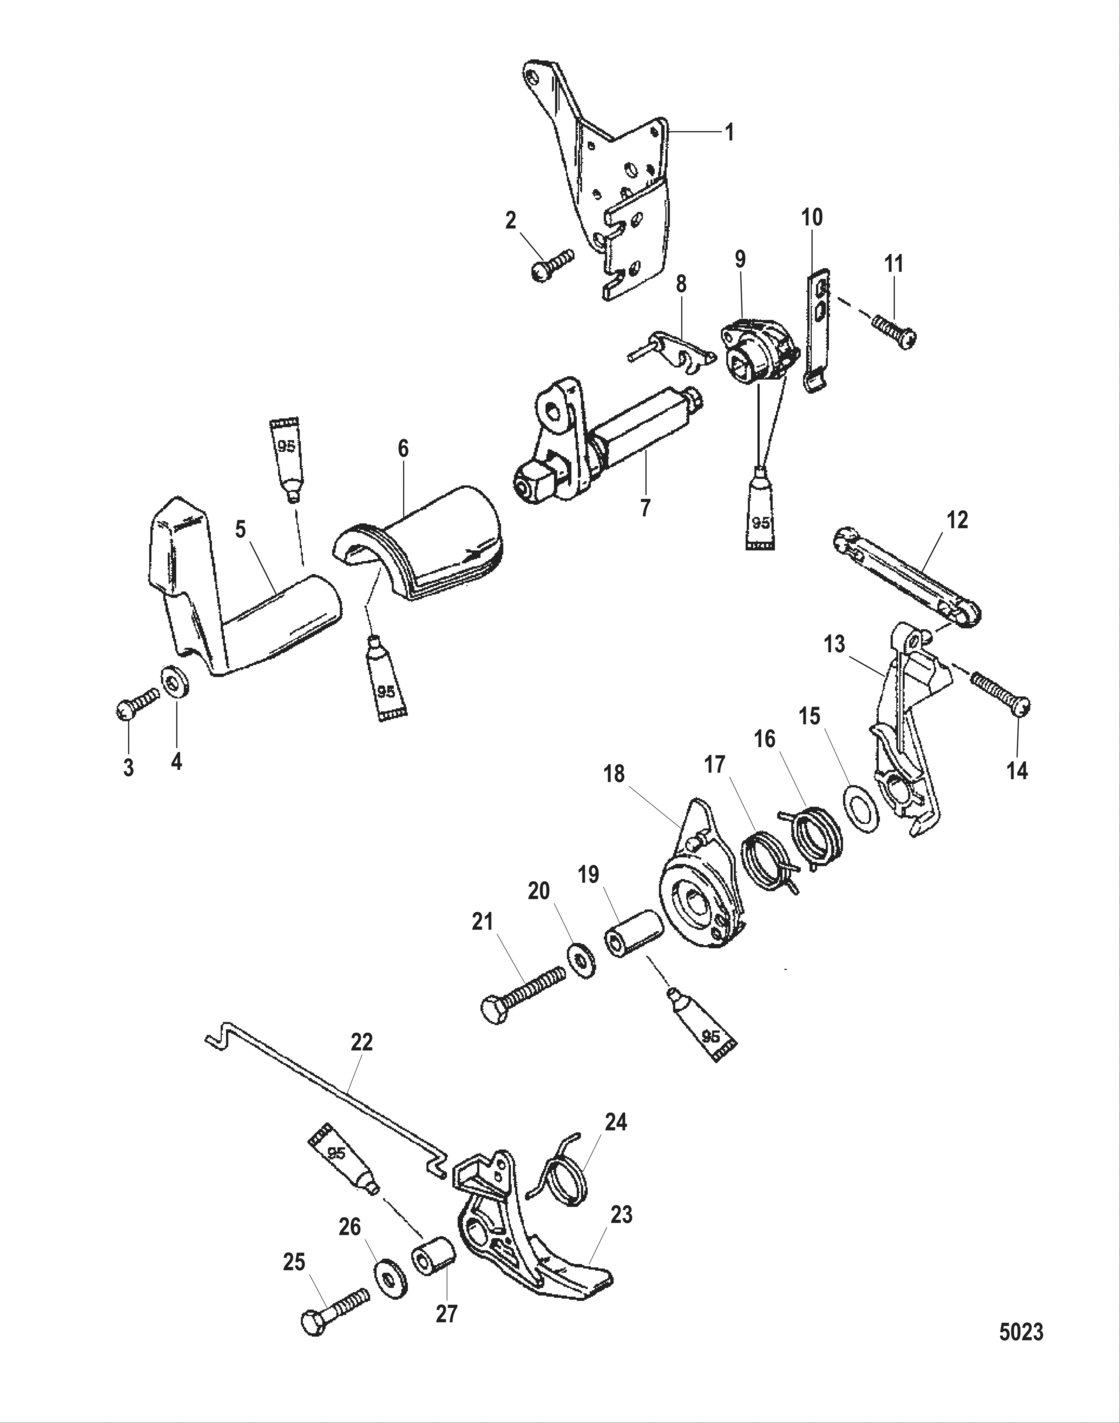 Throttle And Shift Linkage (Side Shift)